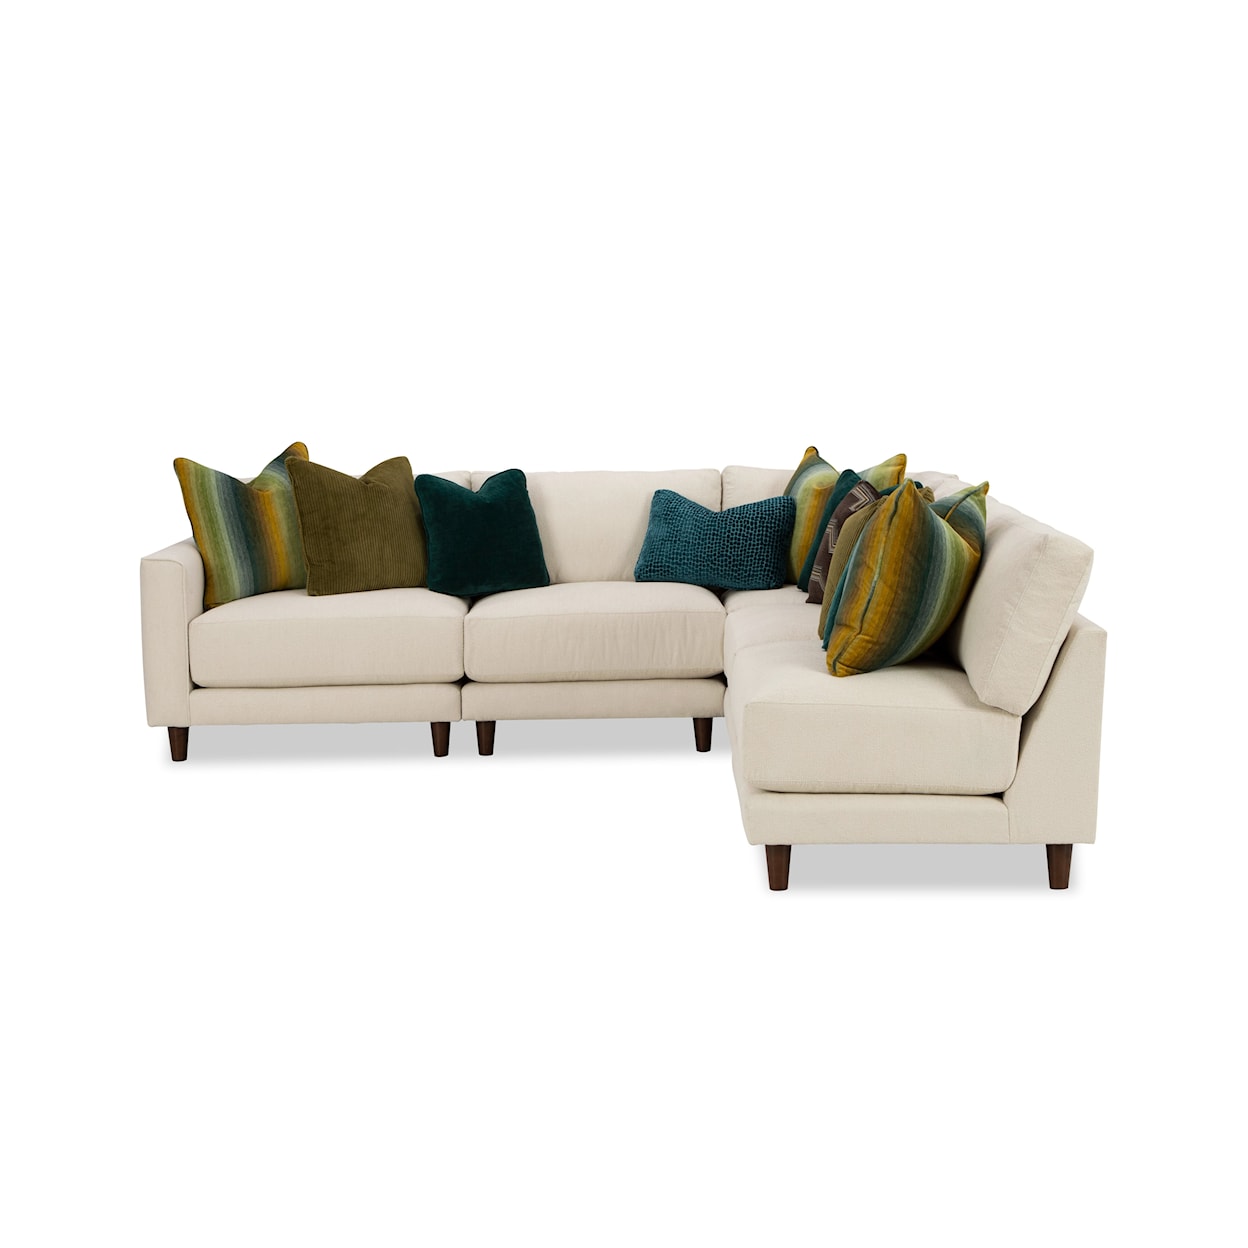 Hickory Craft 735200BD 4-Seat Sectional Sofa